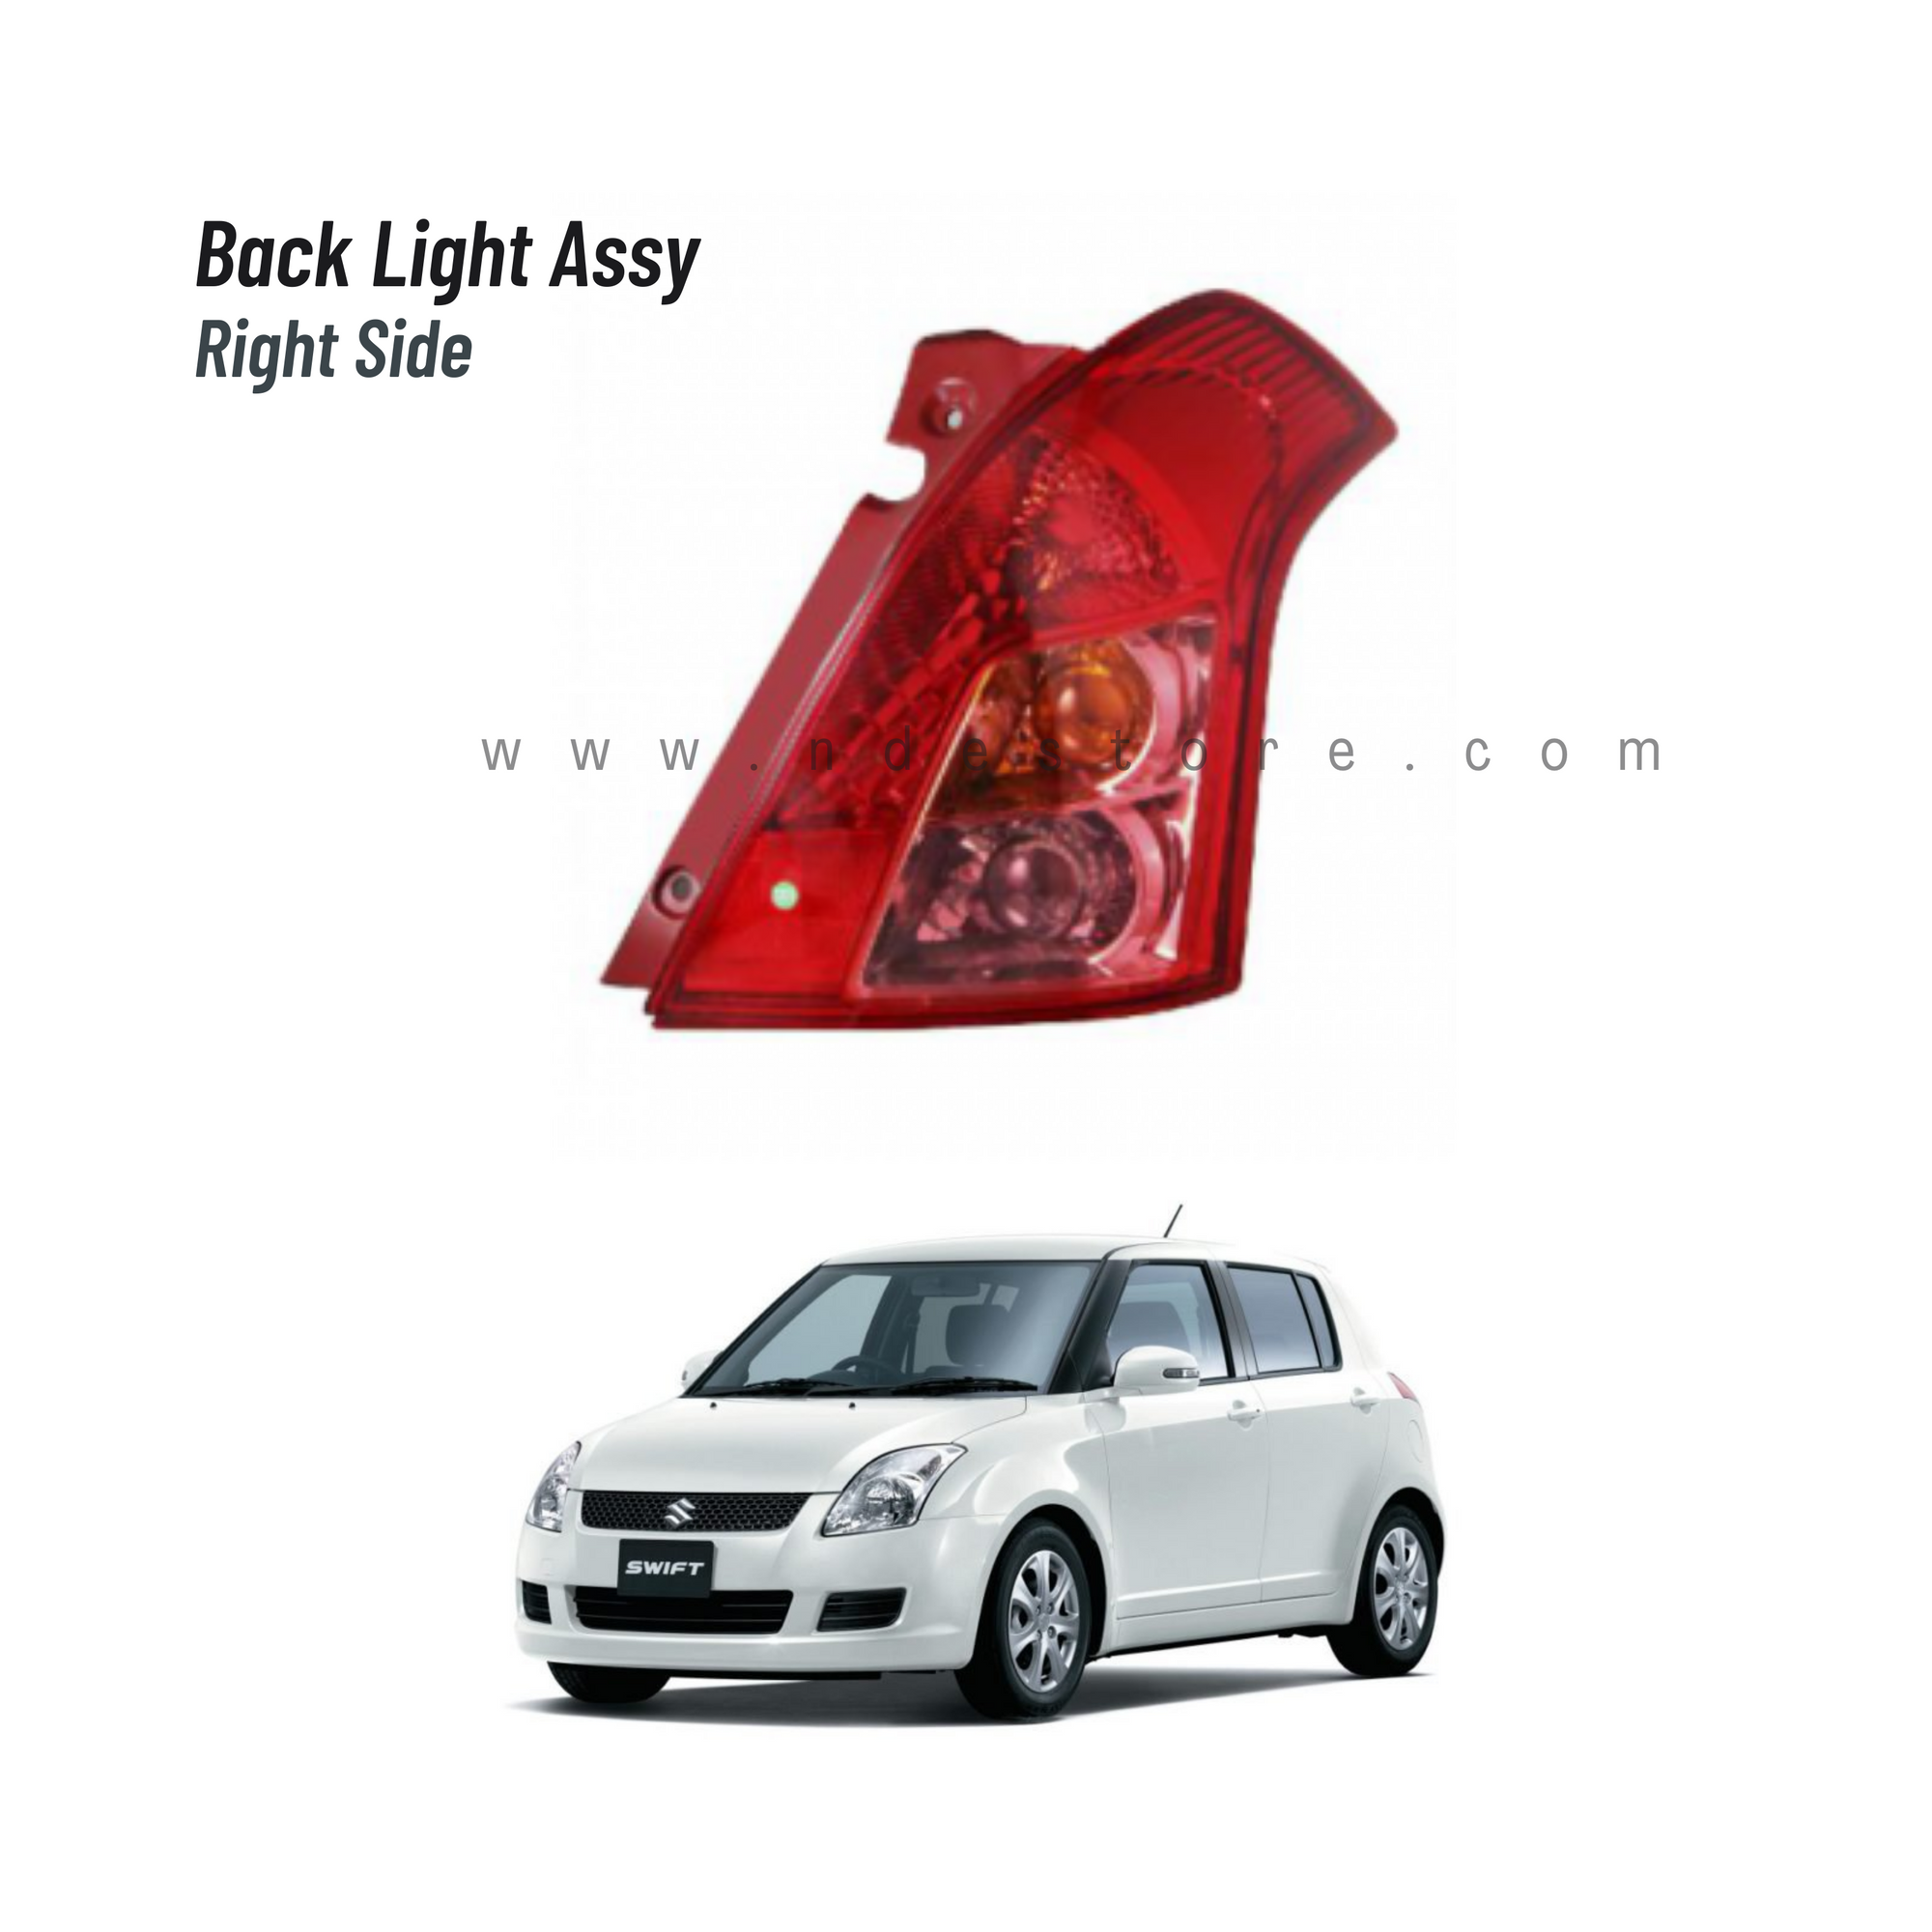 BACK LIGHT ASSY IMPORTED FOR SUZUKI SWIFT (2008-2021)